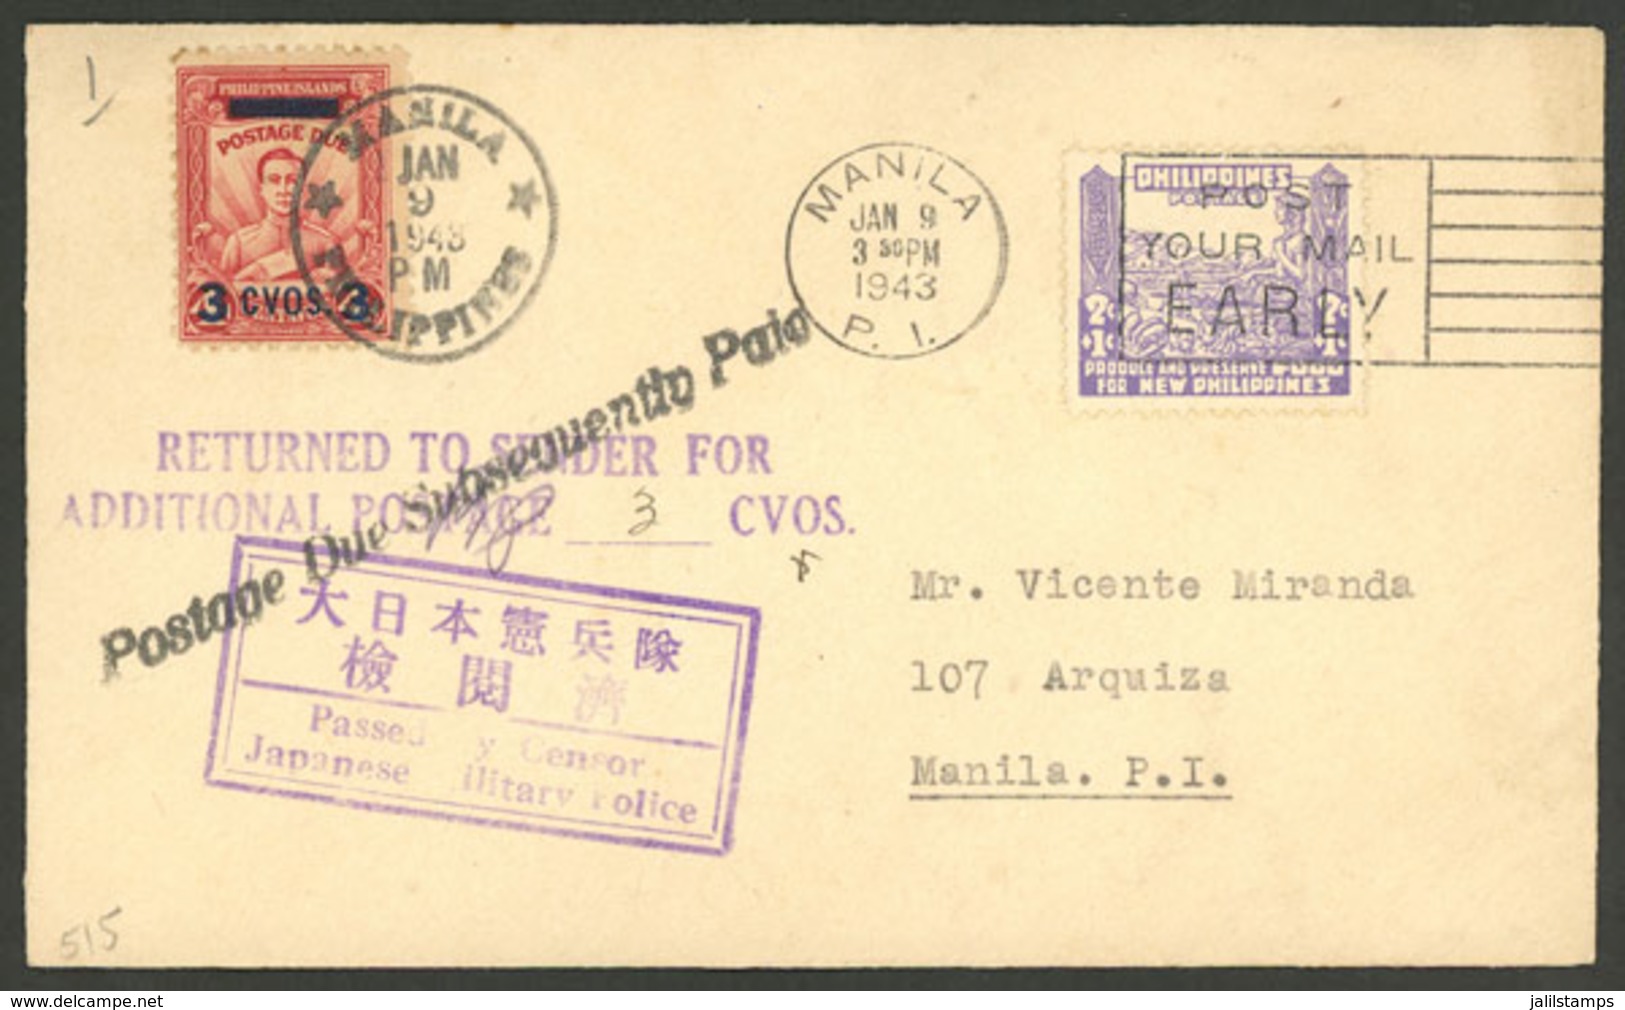 PHILIPPINES: 9/JA/1943 Cover Used In Manila With Insufficient Postage And Postage Due Mark, Which Was Later Paid With An - Philippines